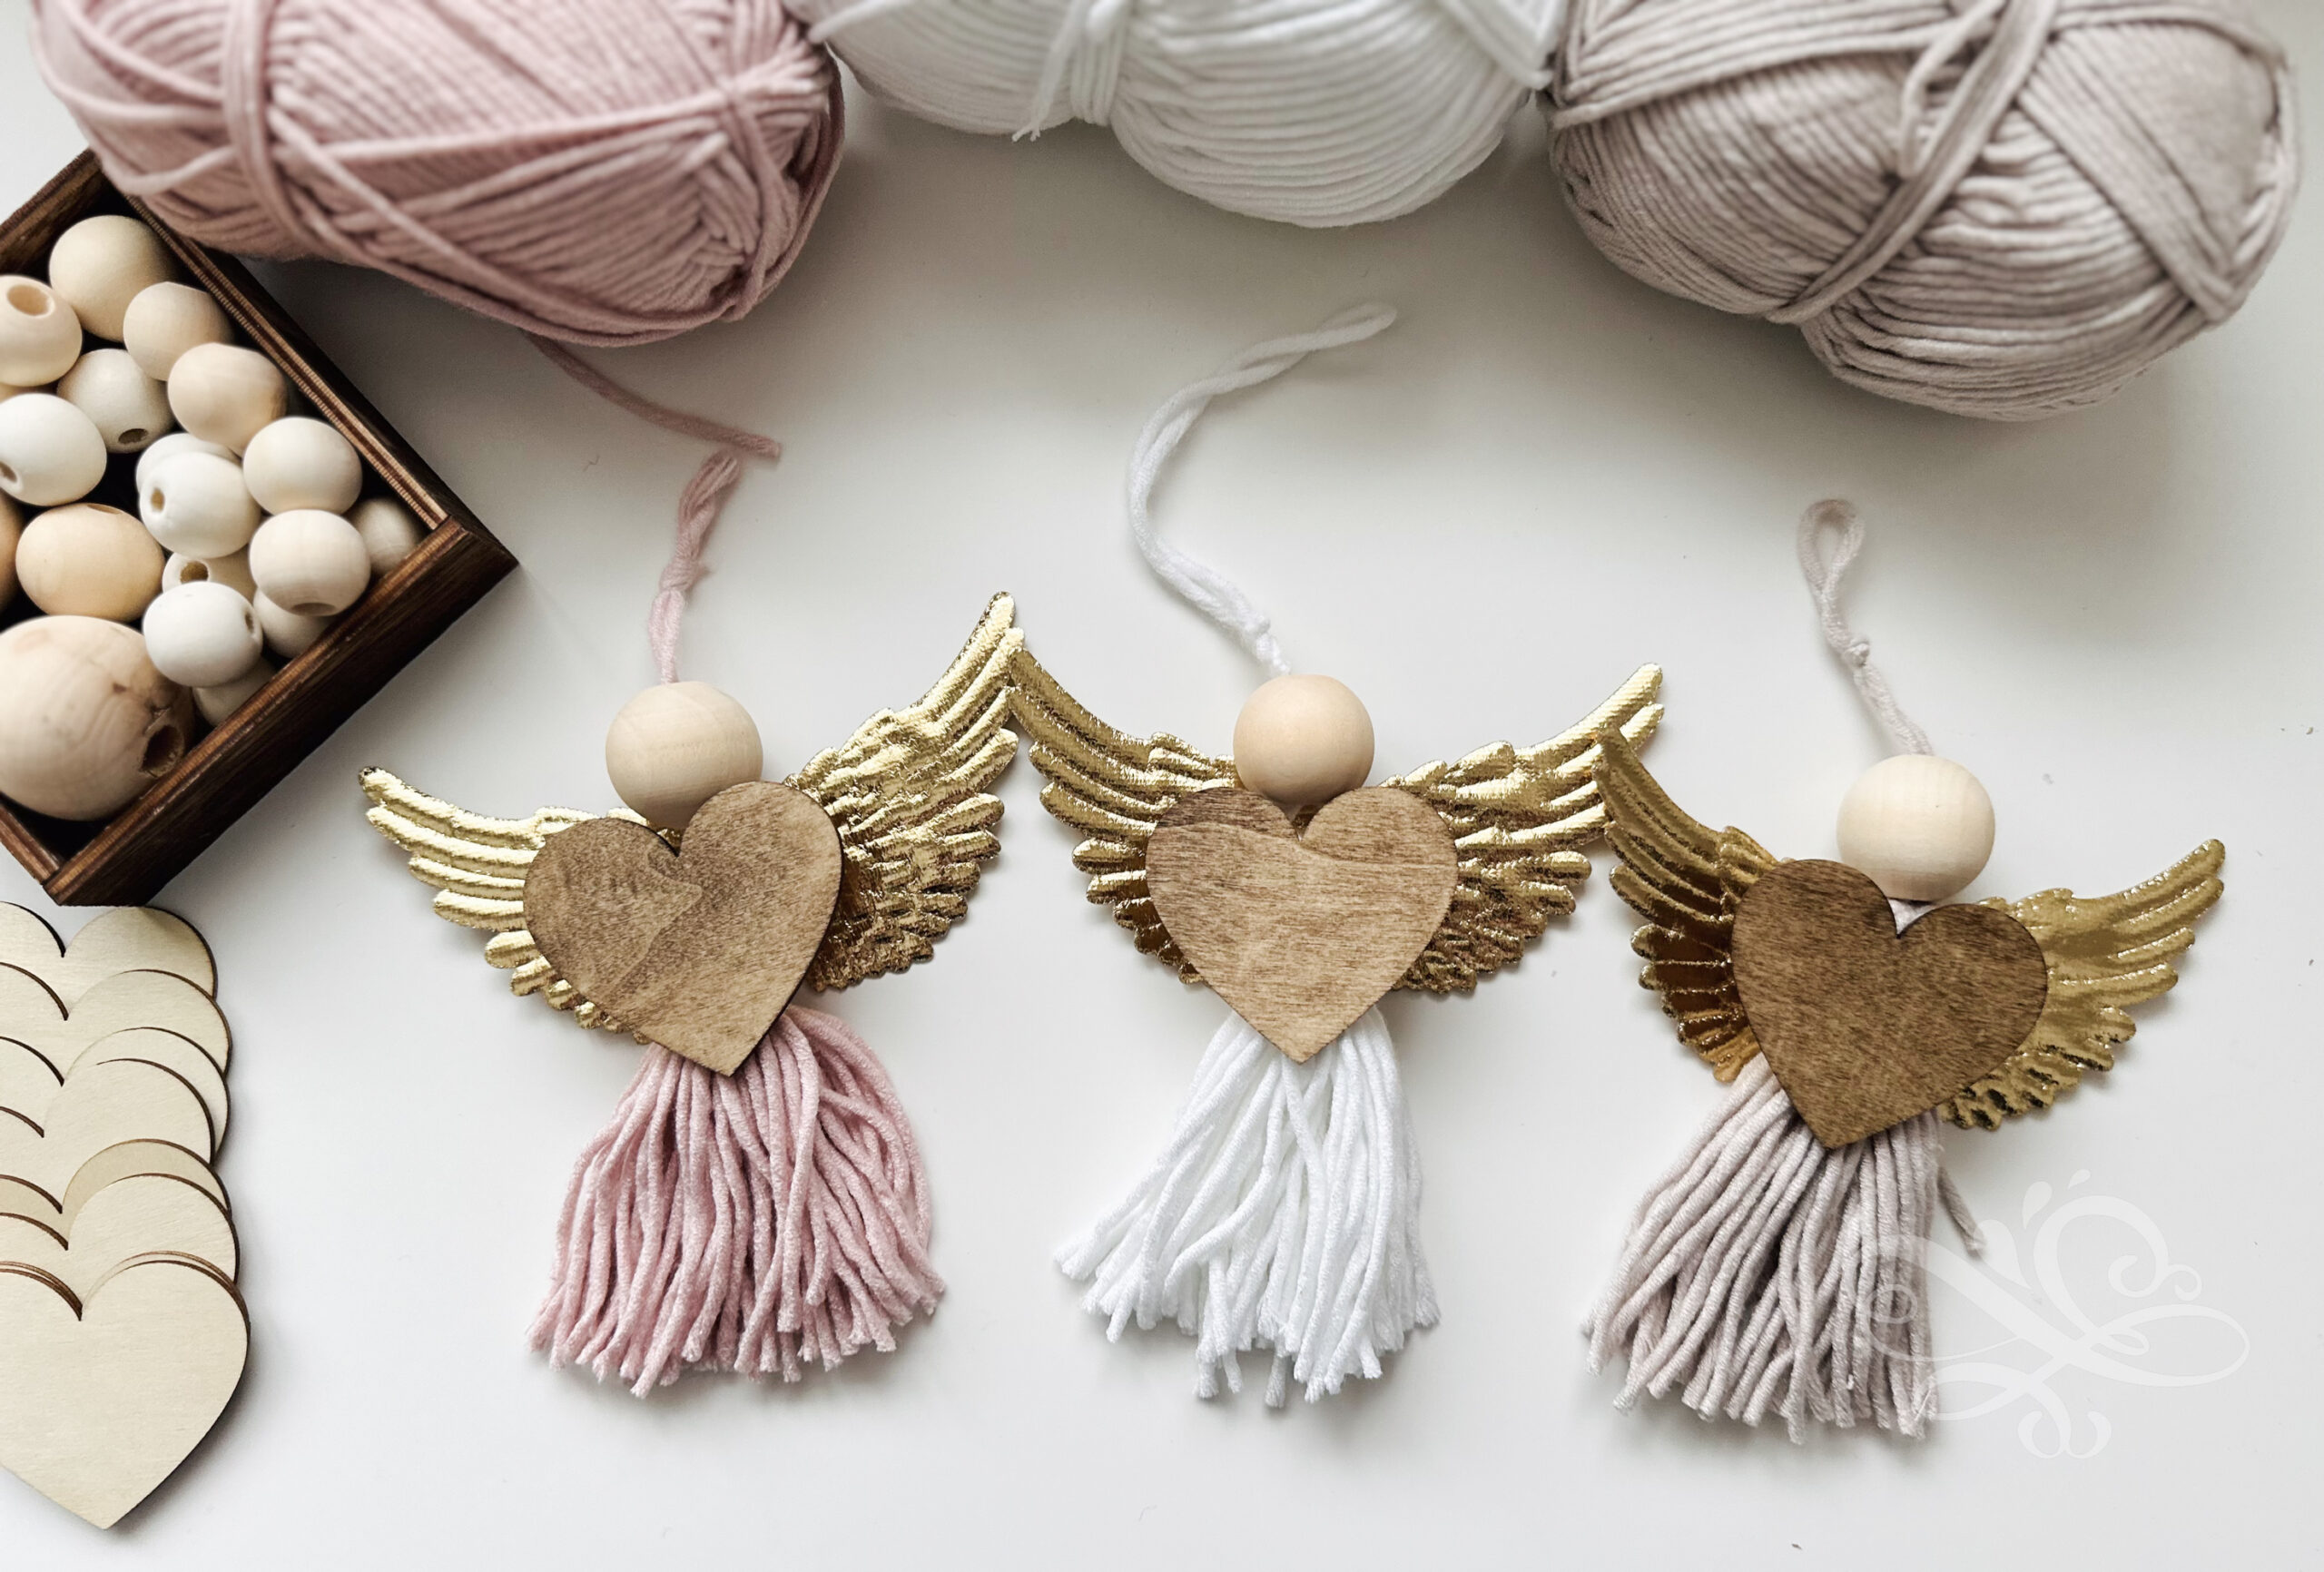 How to Make a Heart Angel Ornament